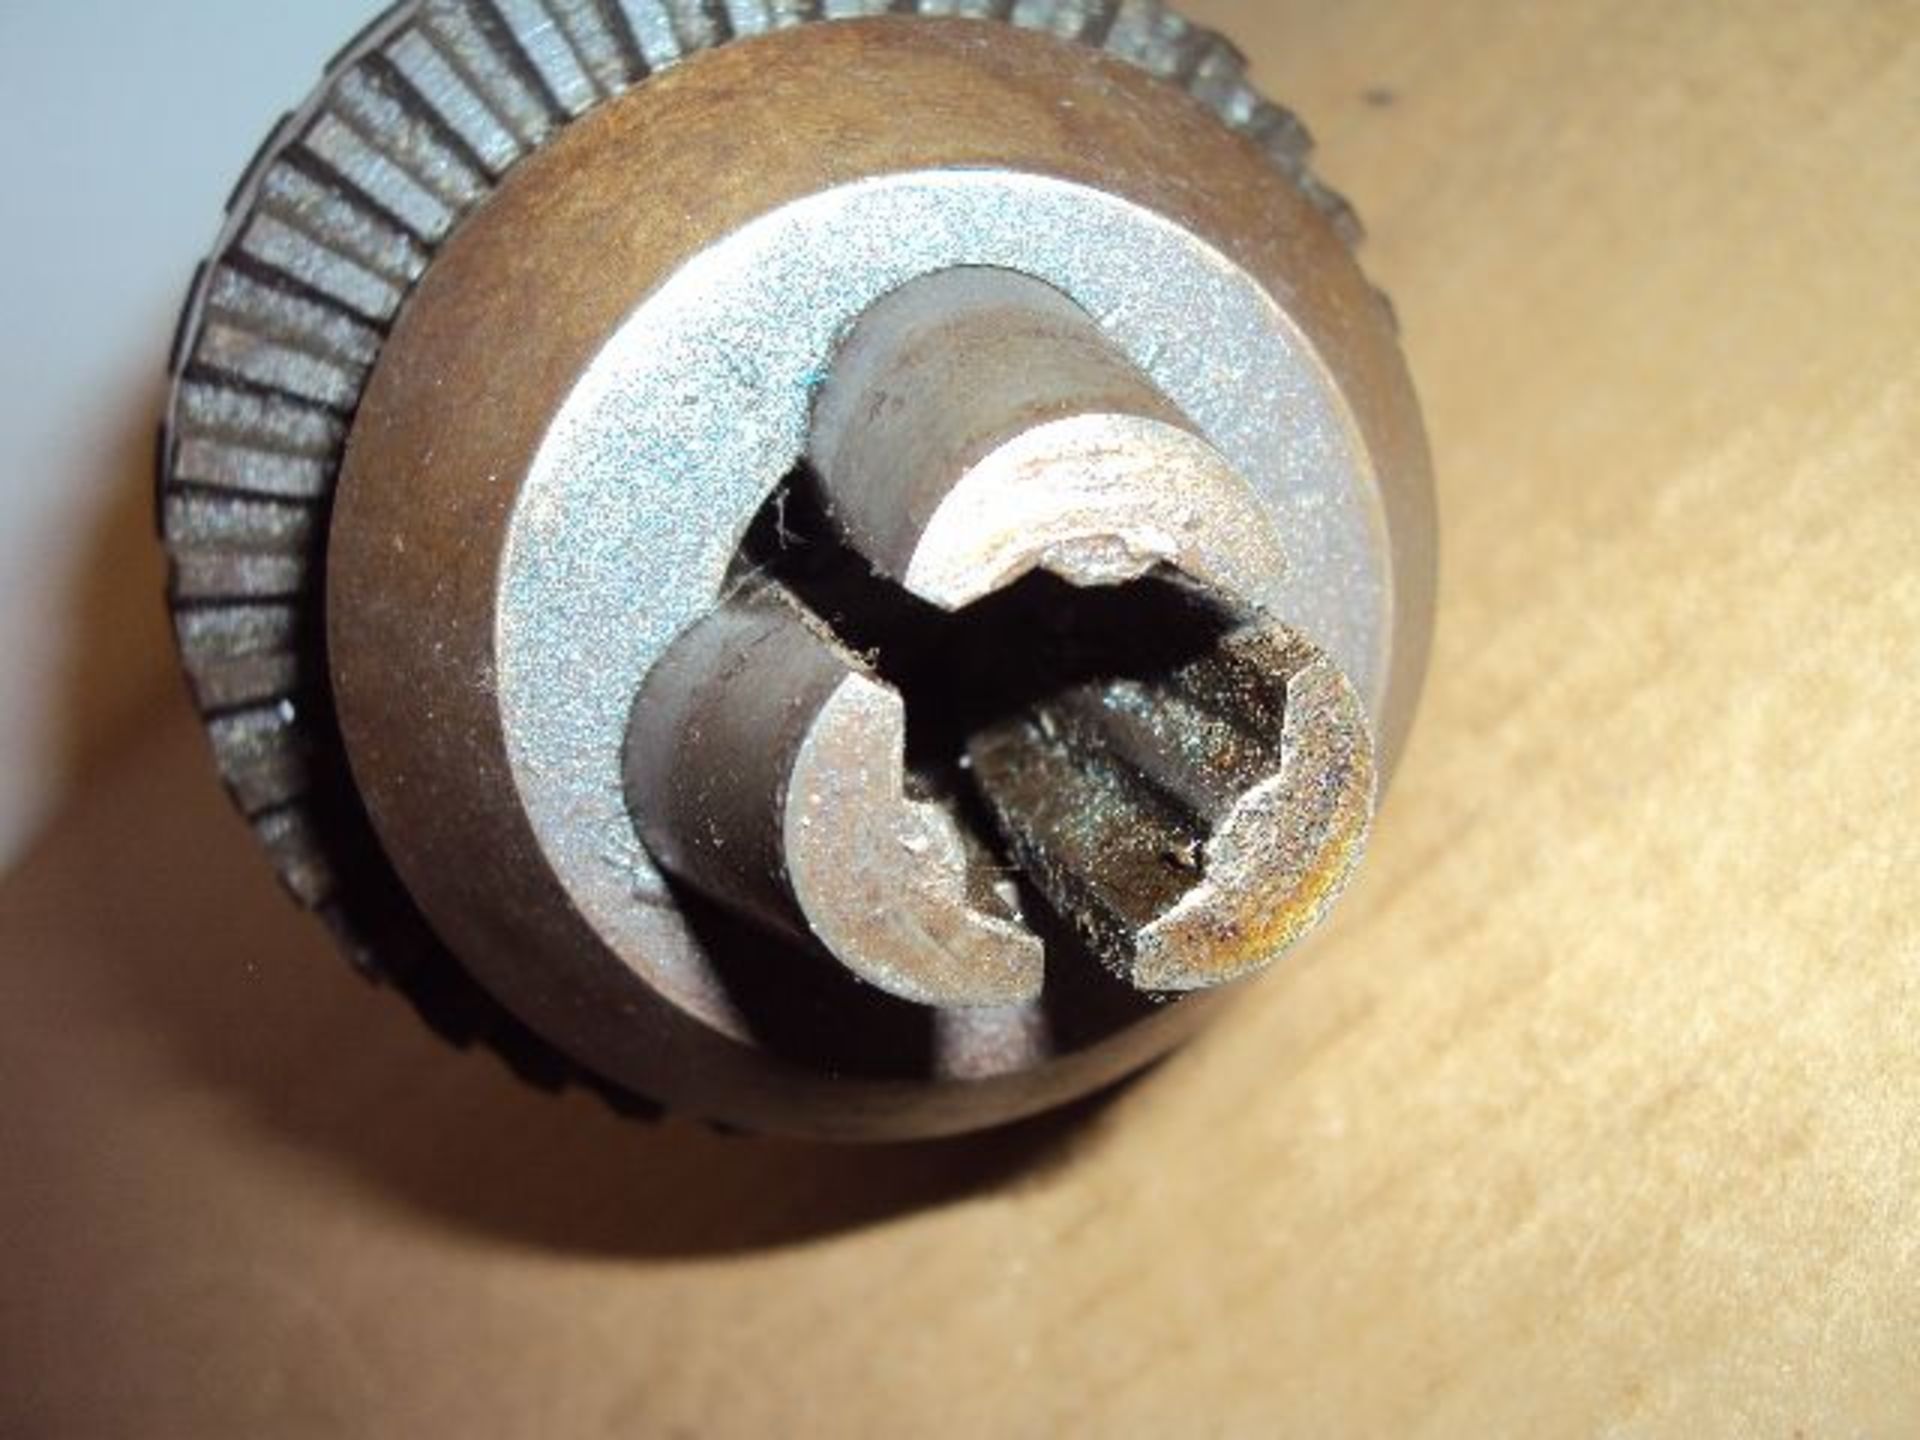 Jacobs No. 20N Super Ball Bearing Drill Chuck with Jacobs MT5 Shank - Image 5 of 6